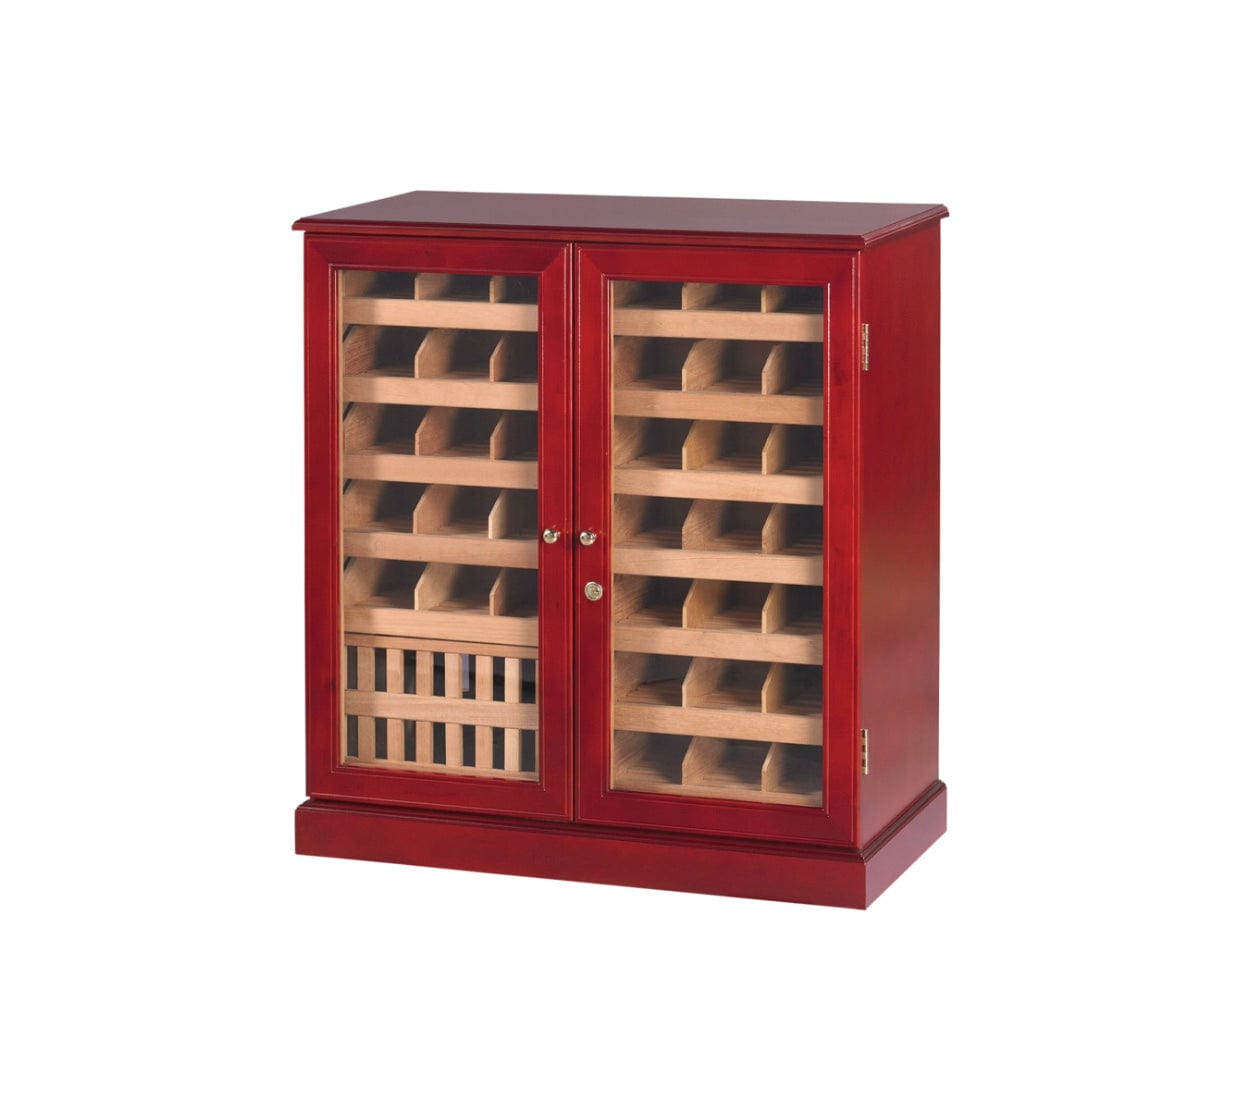 Quality Importers Humidor Commercial 1500 Count Cigar Wall Cabinet Humidor by Quality Importers (HUM-3000) HUM-3000